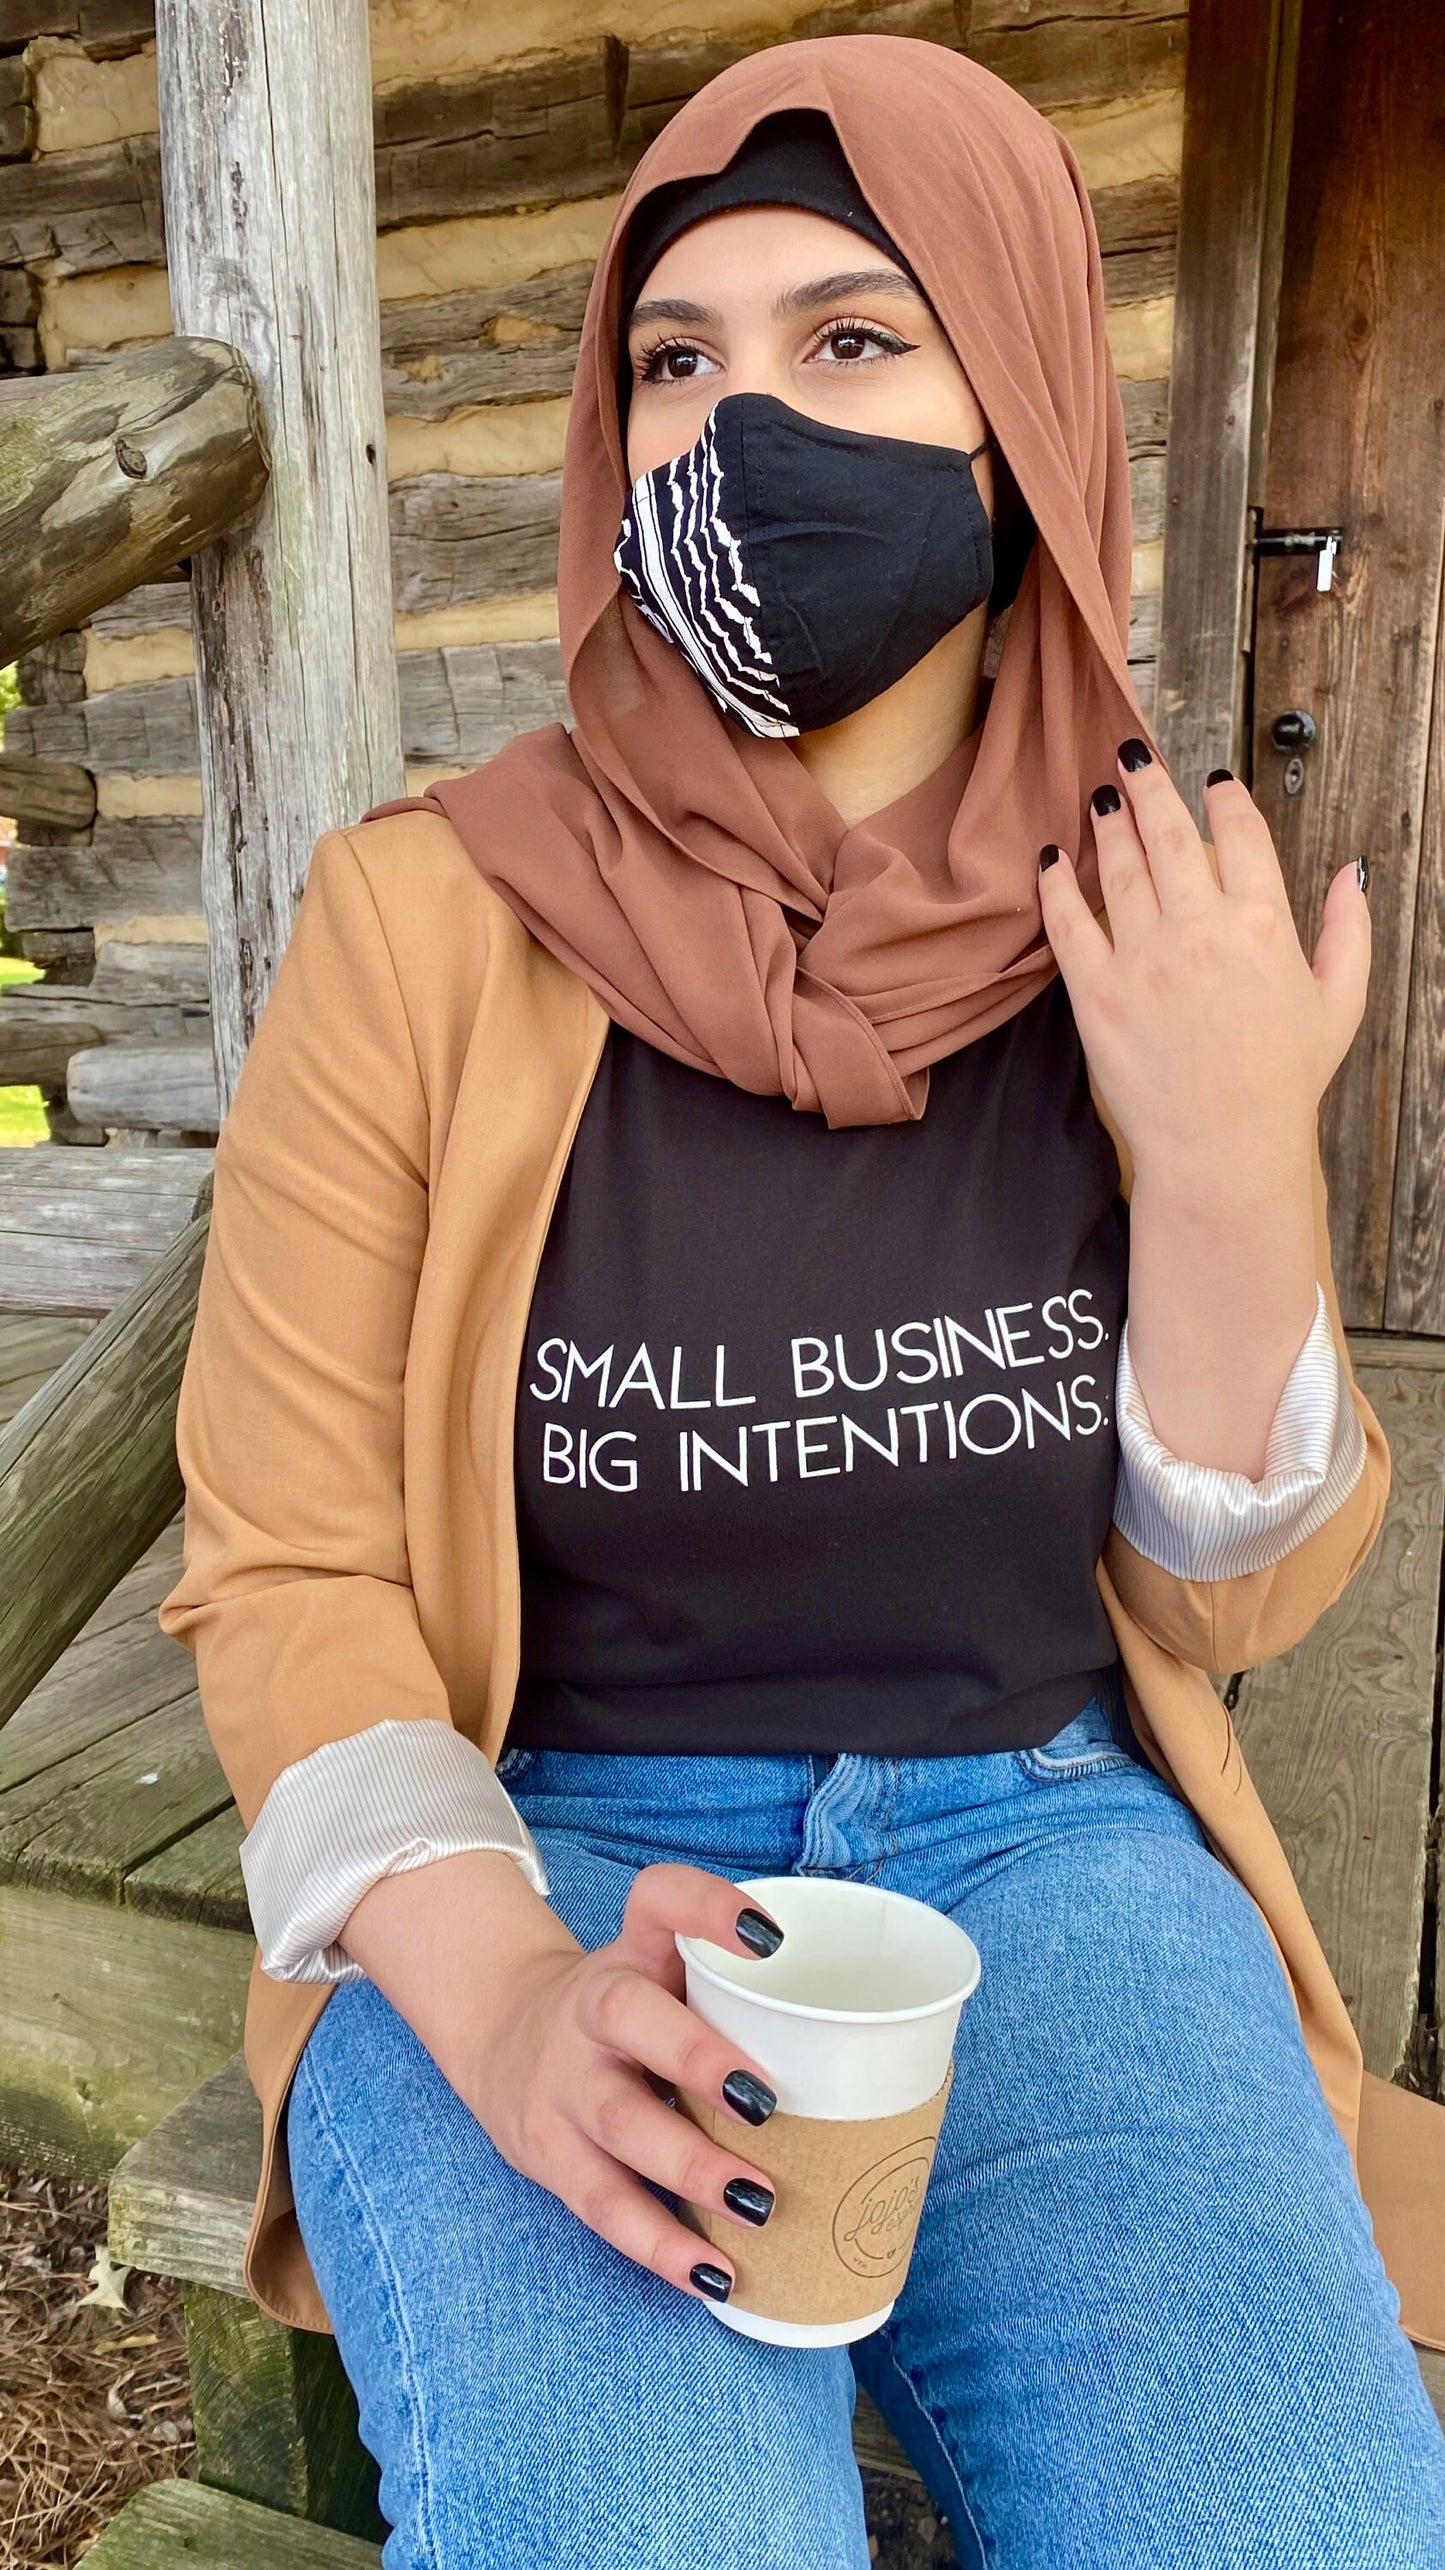 Small Business Big Intentions T-shirt - Unisex HTV - 100% organic Cotton T-Shirt -Small Business owner T-shirt-Small biz owner- Fall Fashion